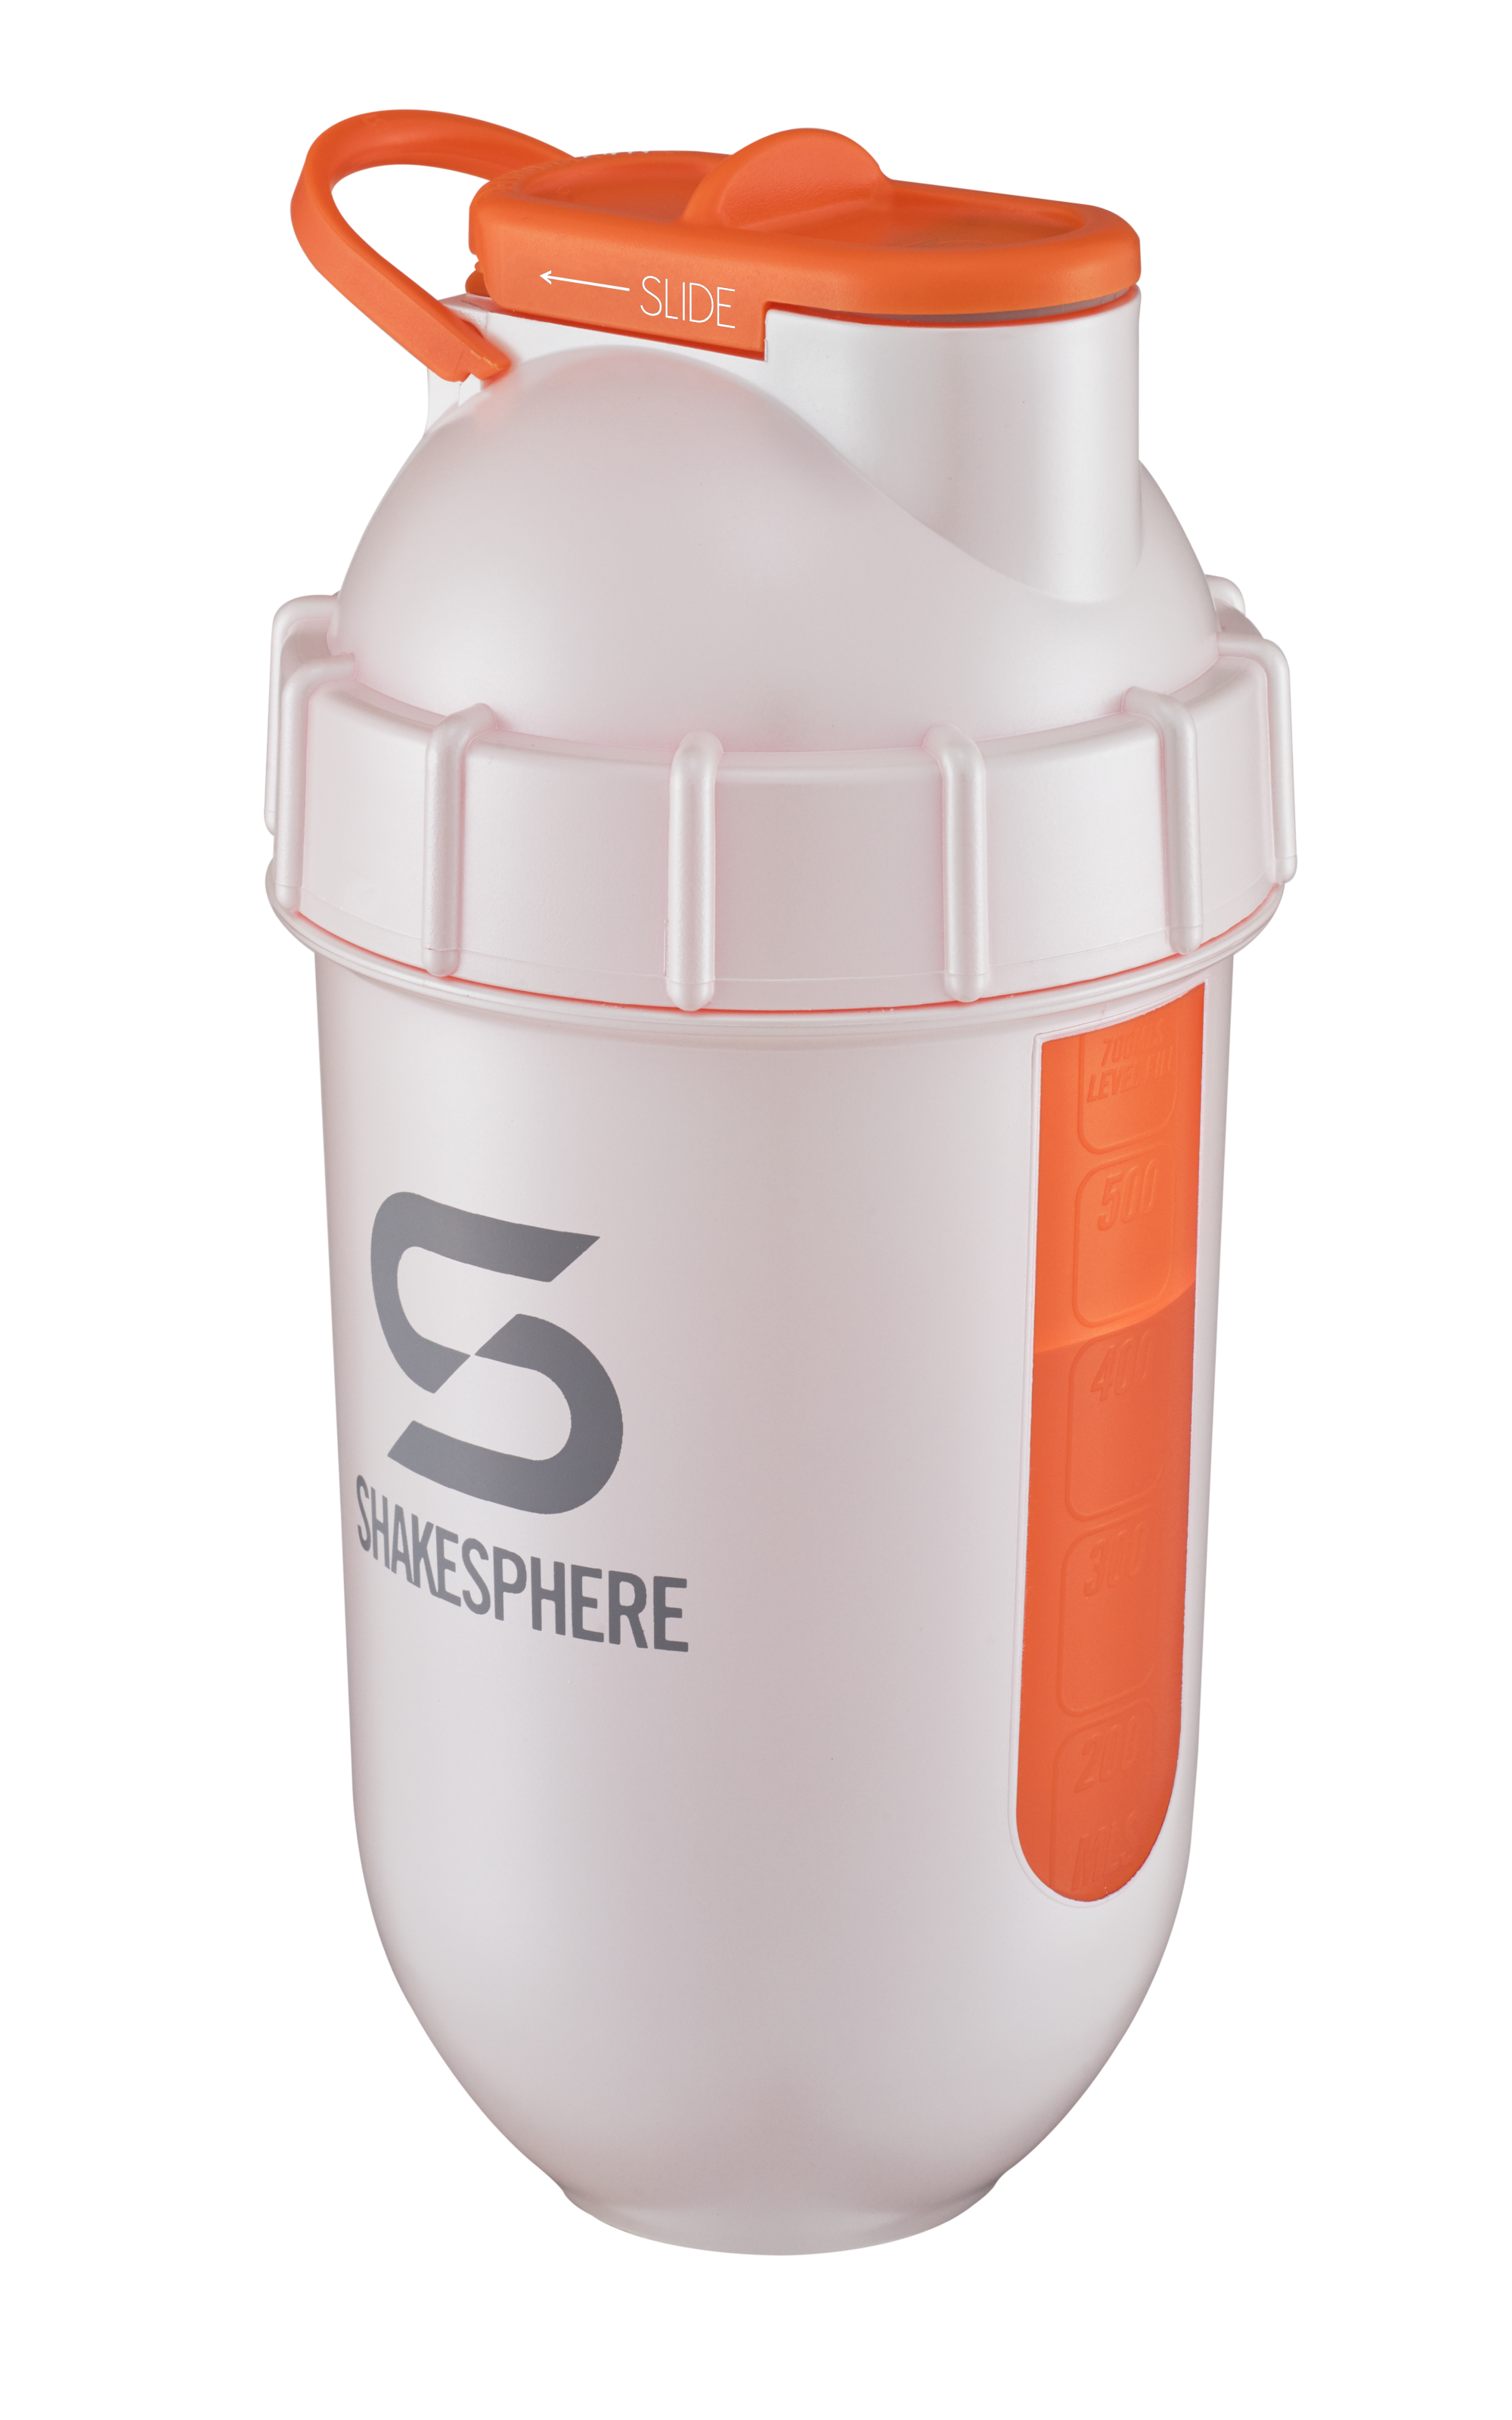 ShakeSphere Tumbler View: Protein Shaker Bottle with Side Window, 24oz, Pearl White